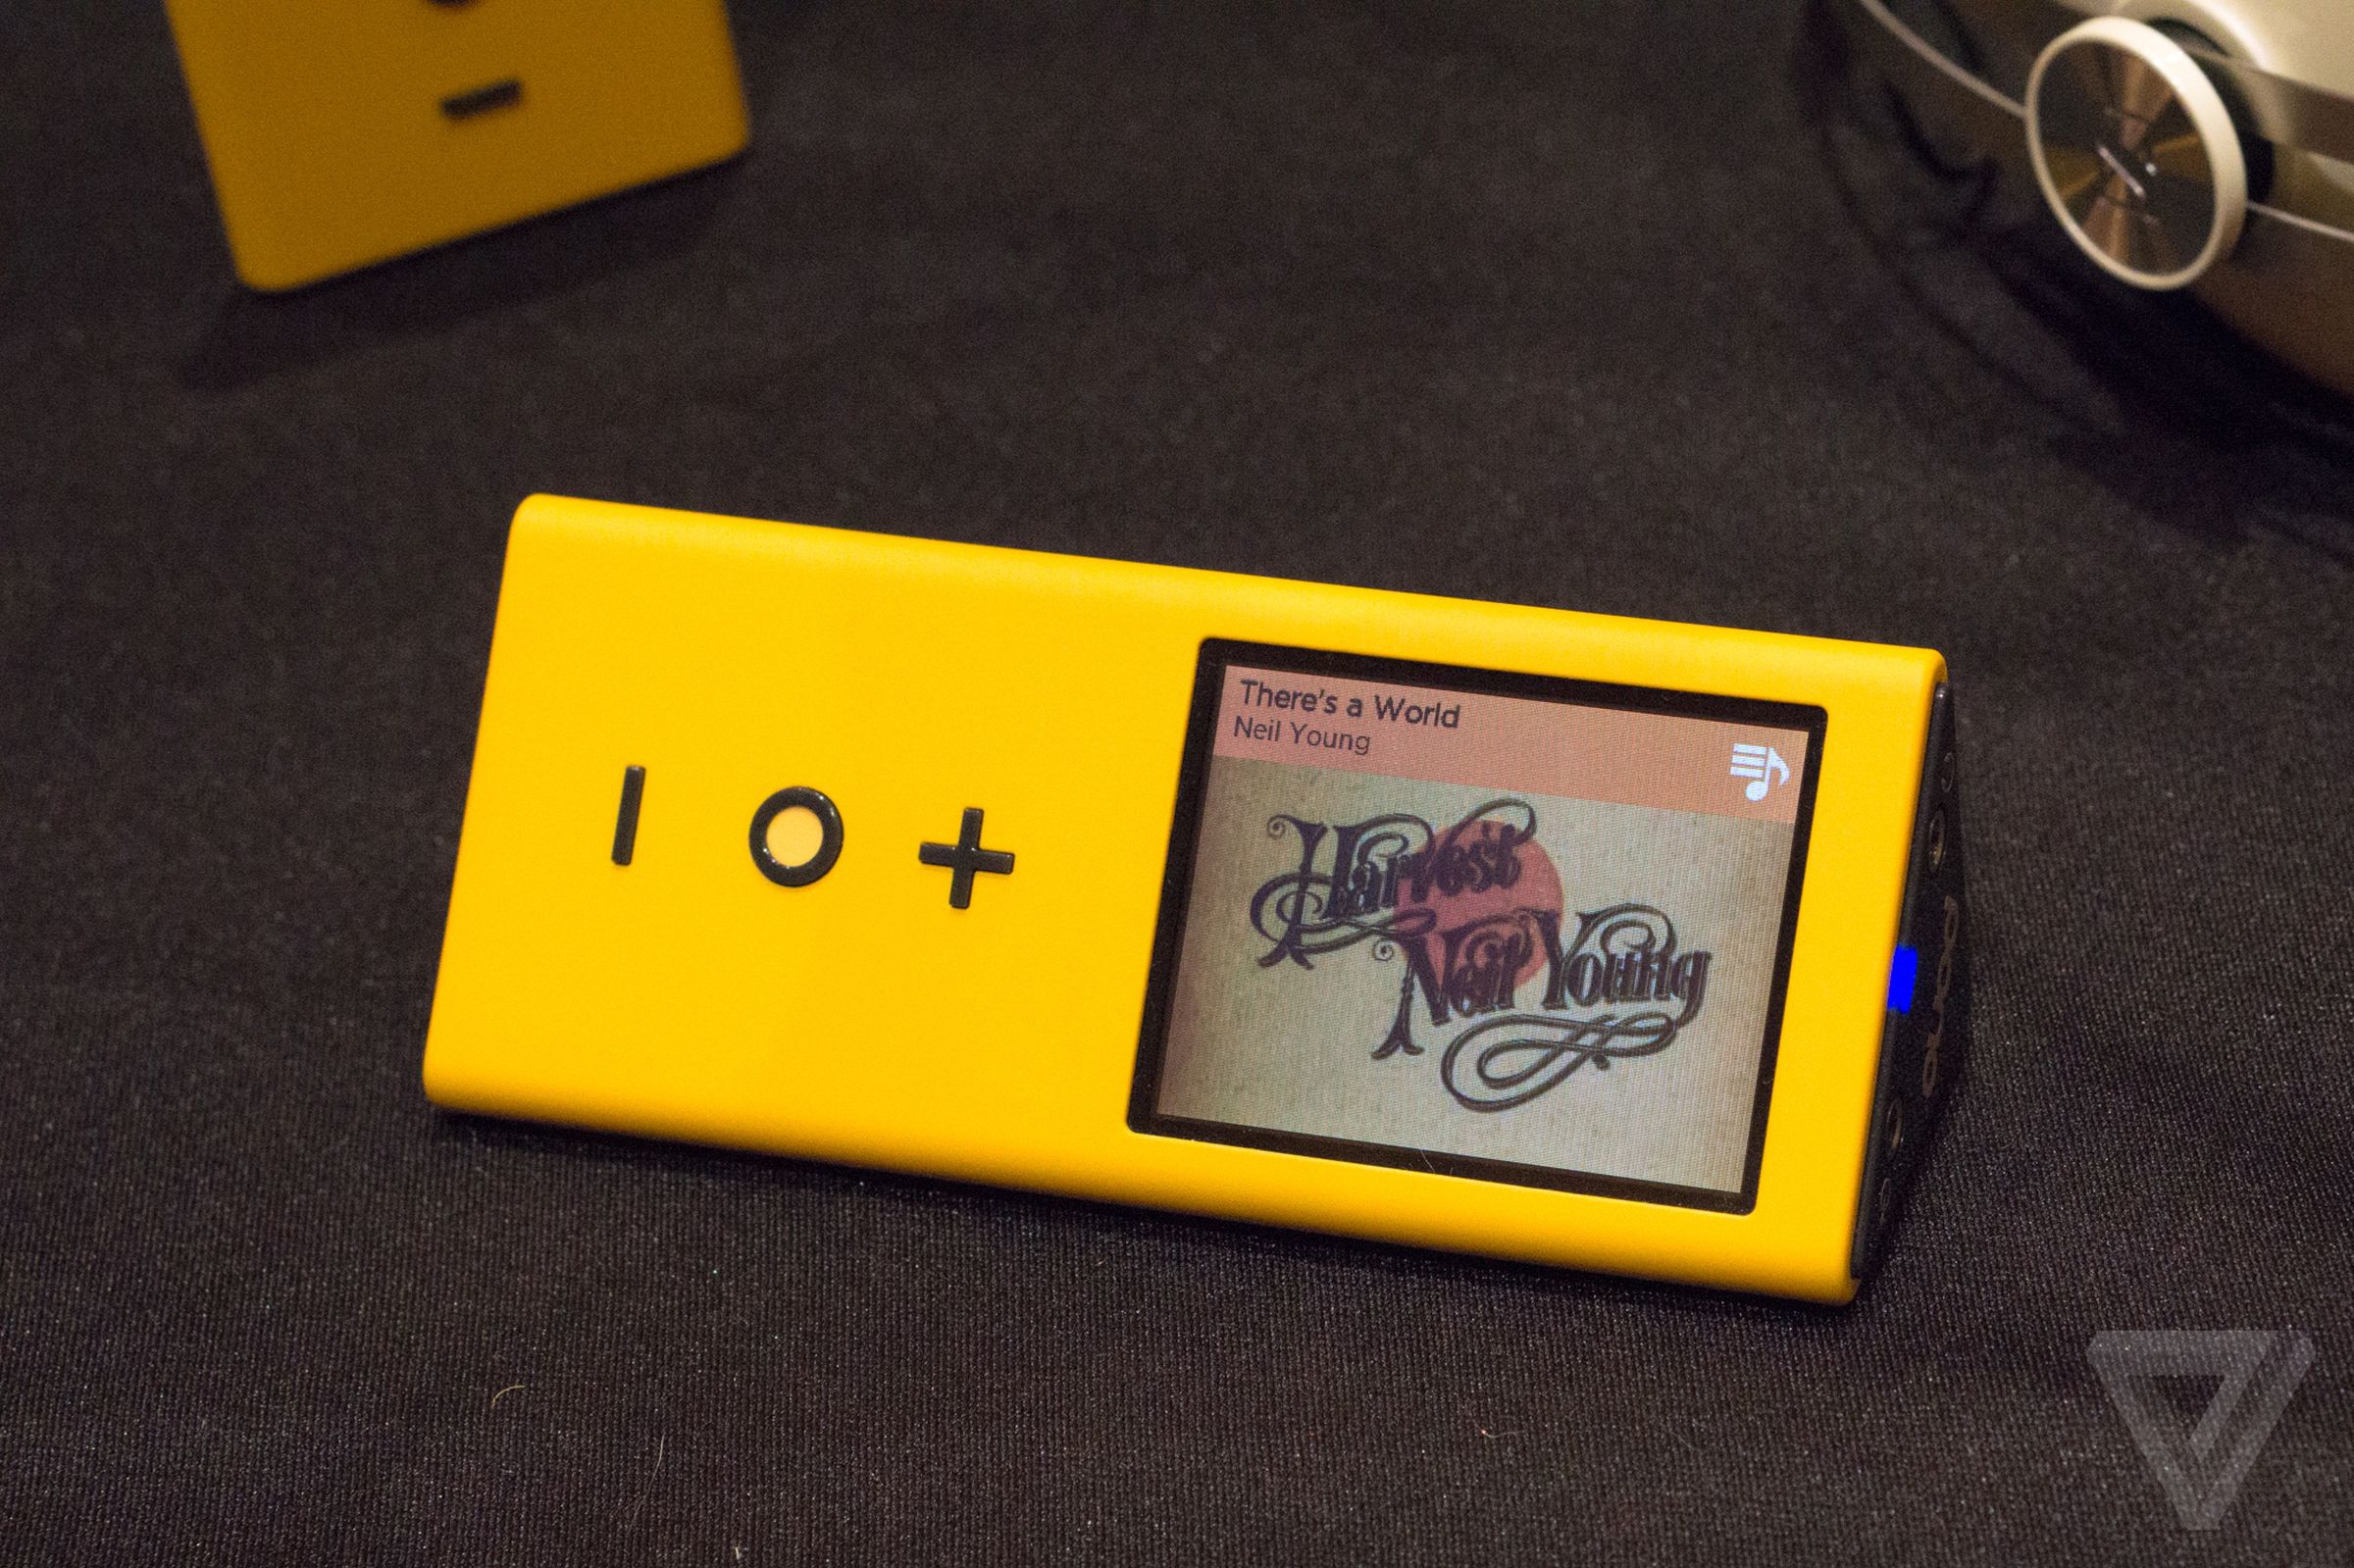 Pono music player hands-on photos